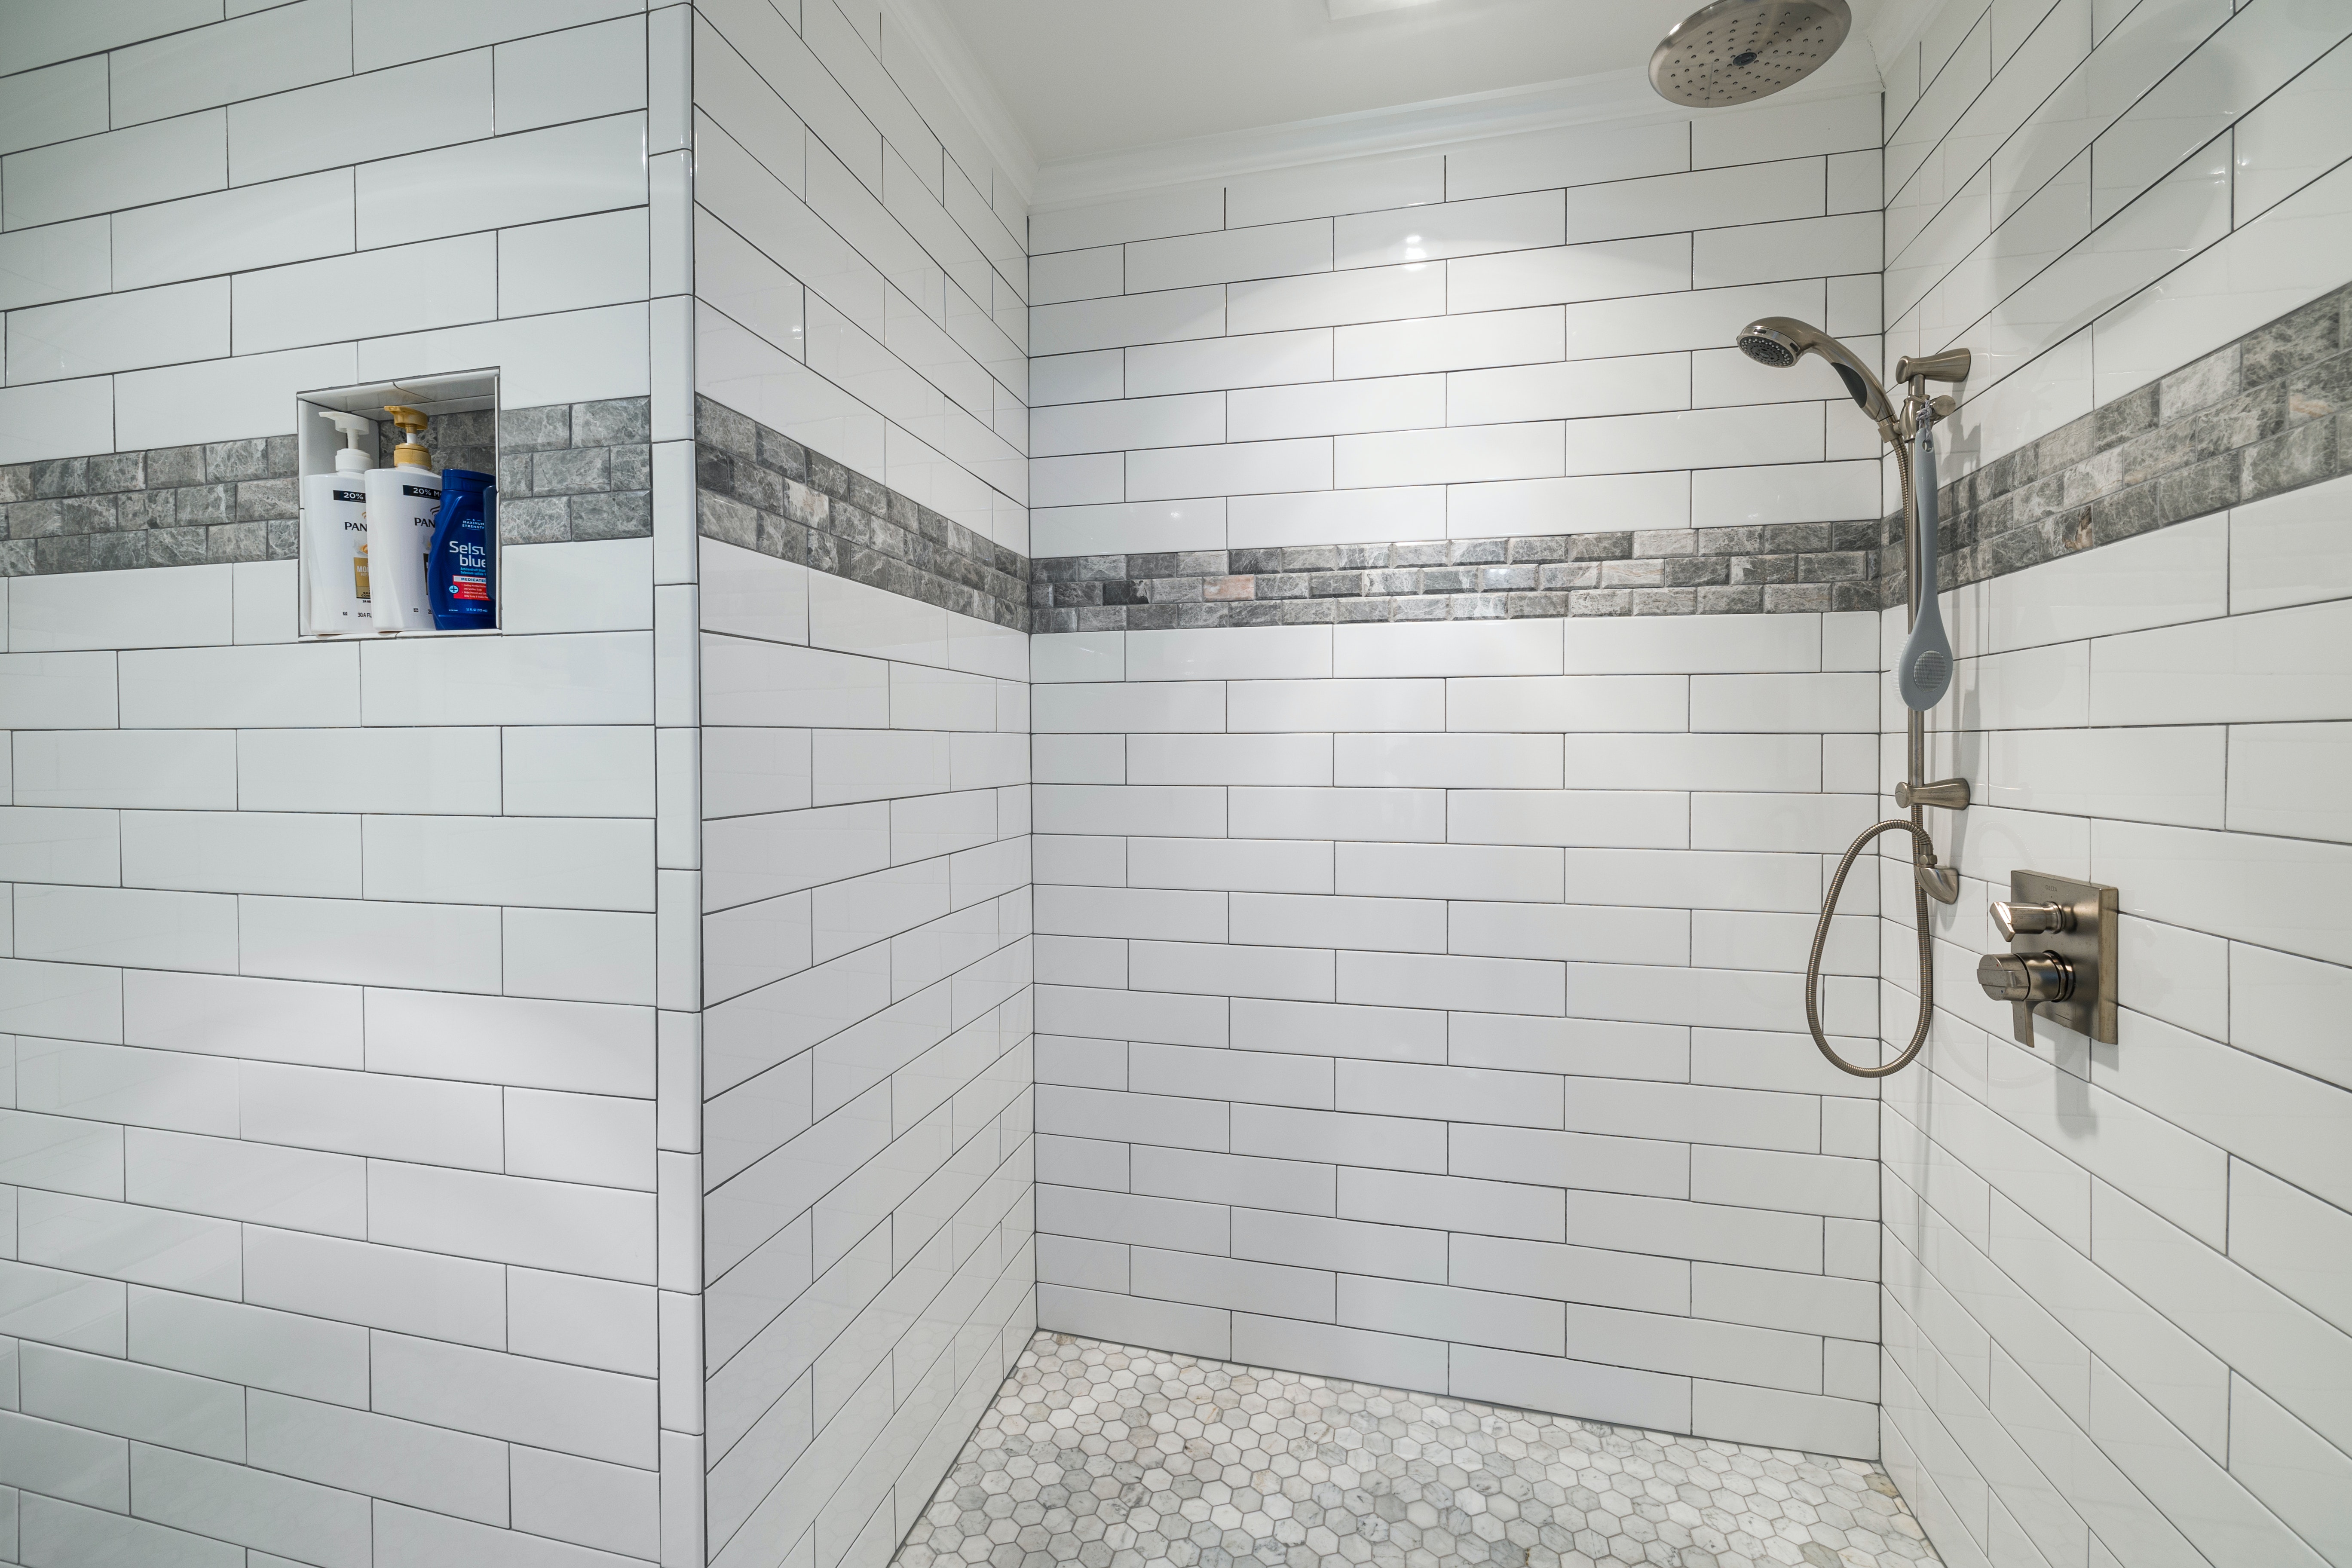 A sleek, walk-in shower enclosure accented by white horizontal metro tiles, finished with stone-effect border tiles.